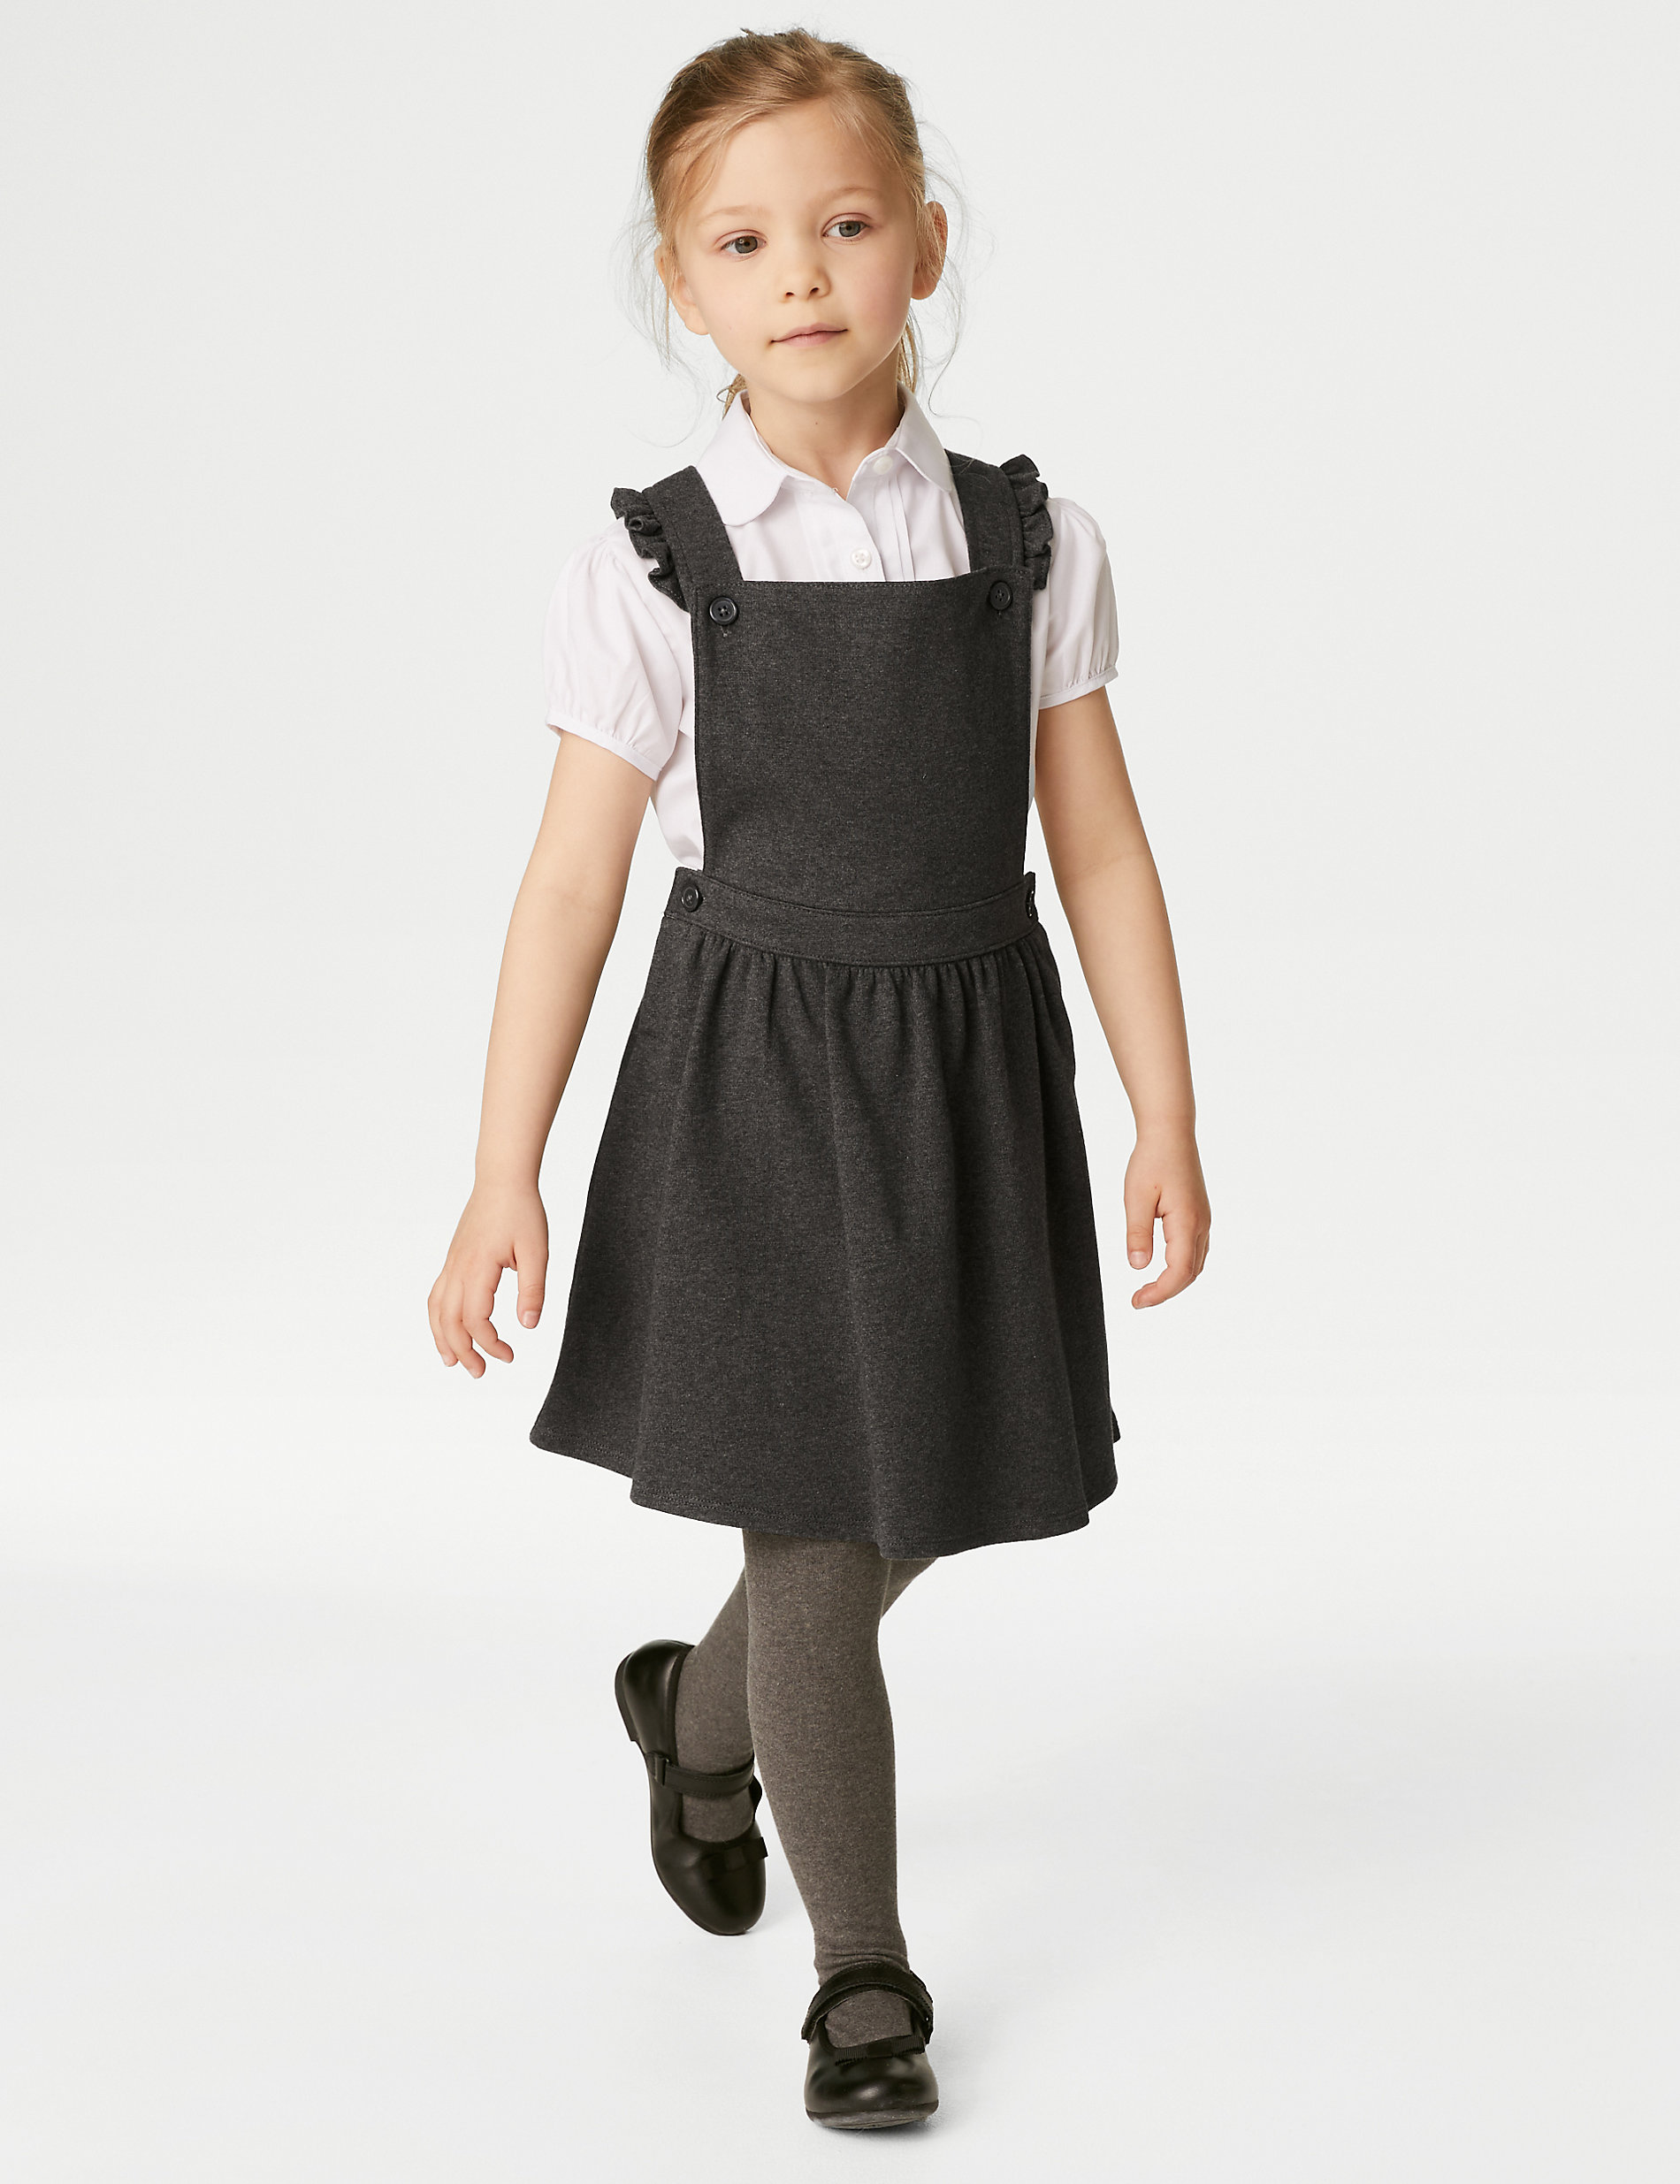 BACK TO SCHOOL GREY PINAFORE or BLACK SKIRT  _ AGES 3/4-9/10 YRS